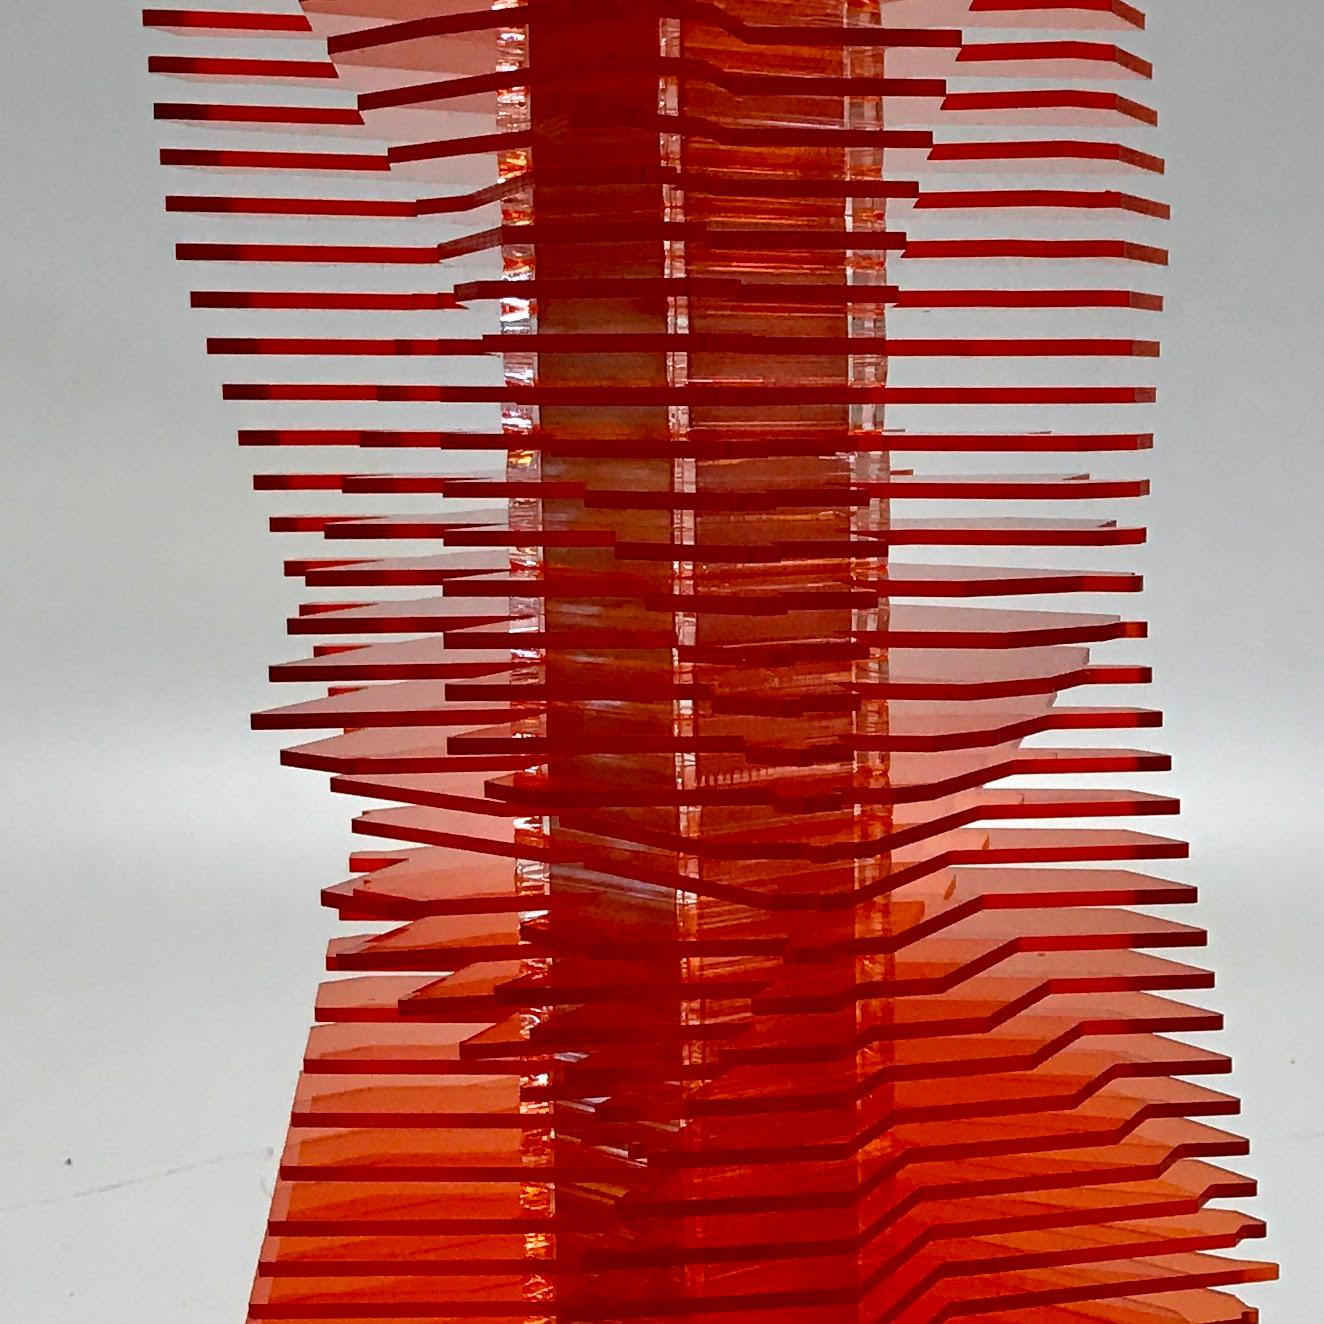 Zaha Amber - kinetic sculpture by J. Margulis - Abstract Geometric Sculpture by Jose Margulis